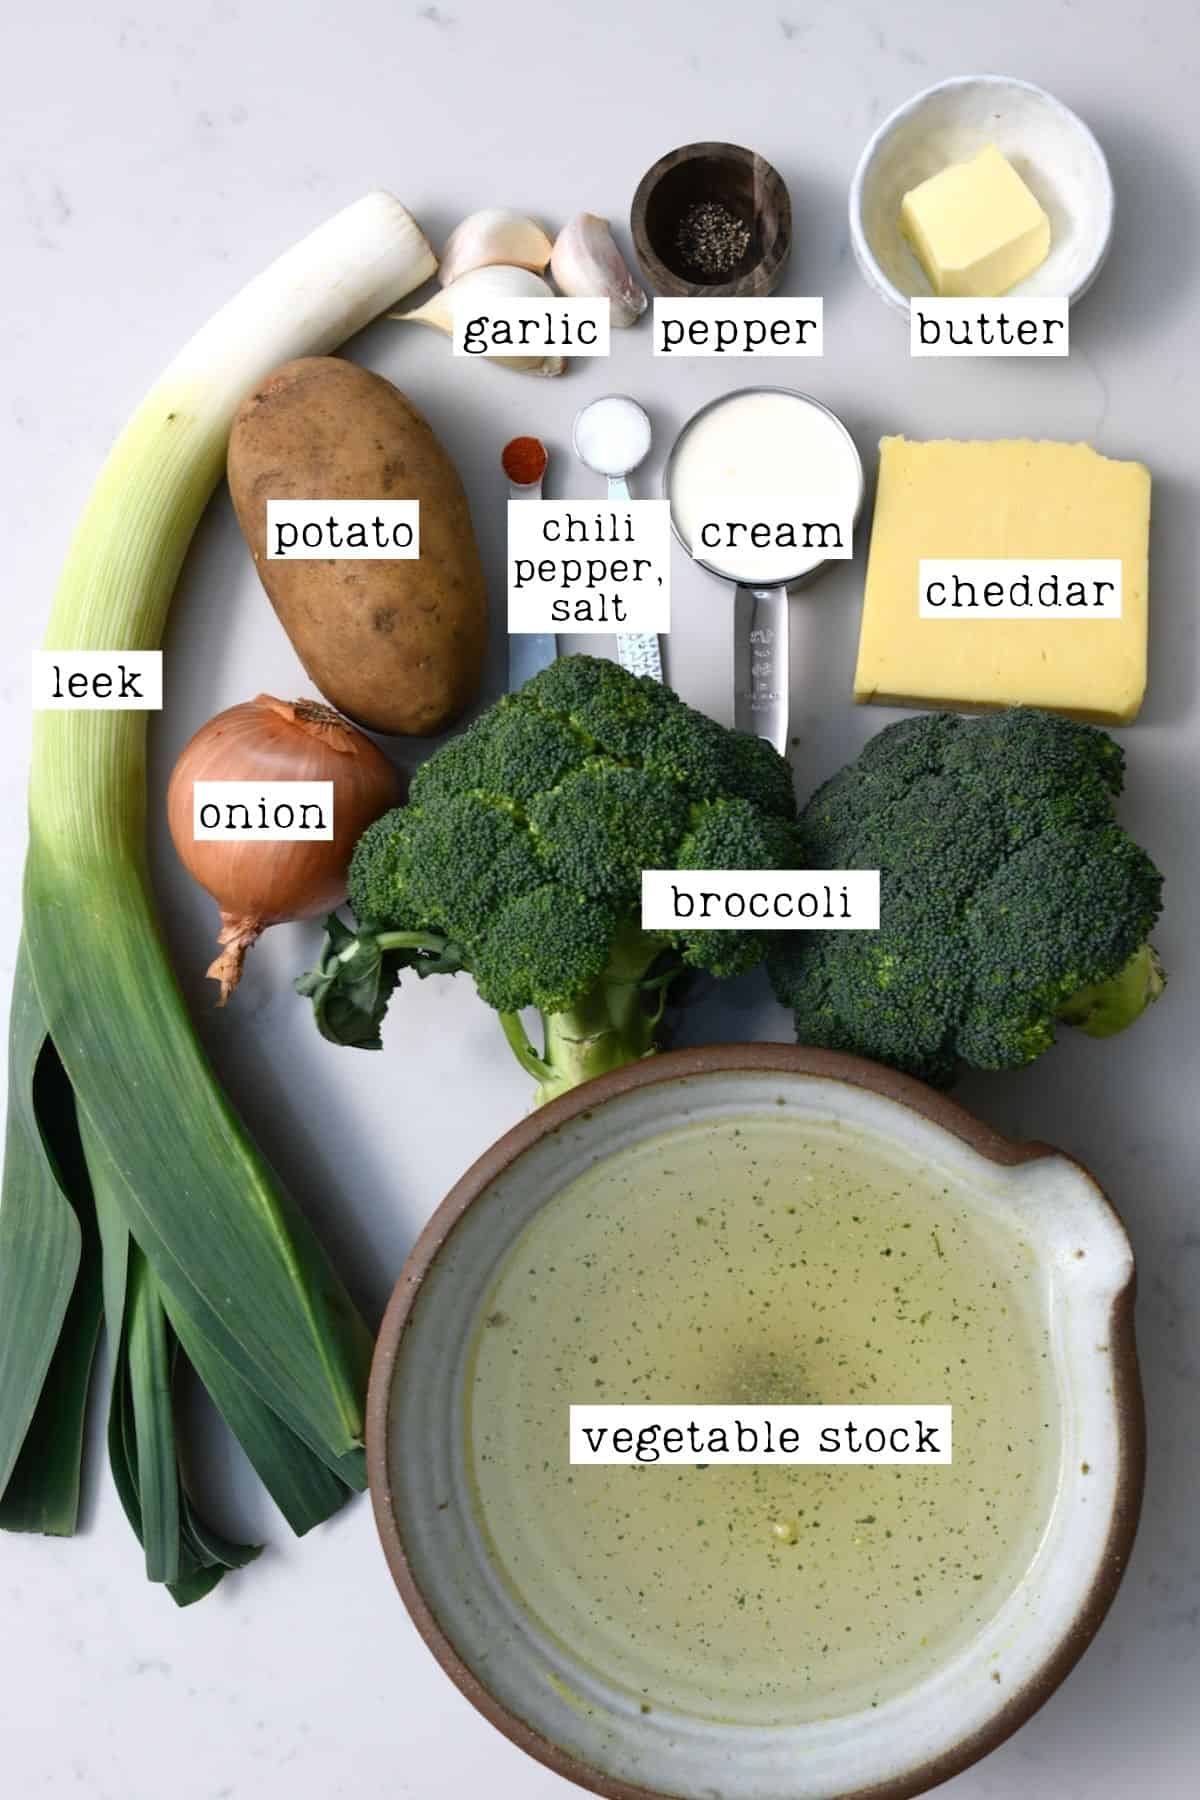 Ingredients for Panera Broccoli Cheddar Soup